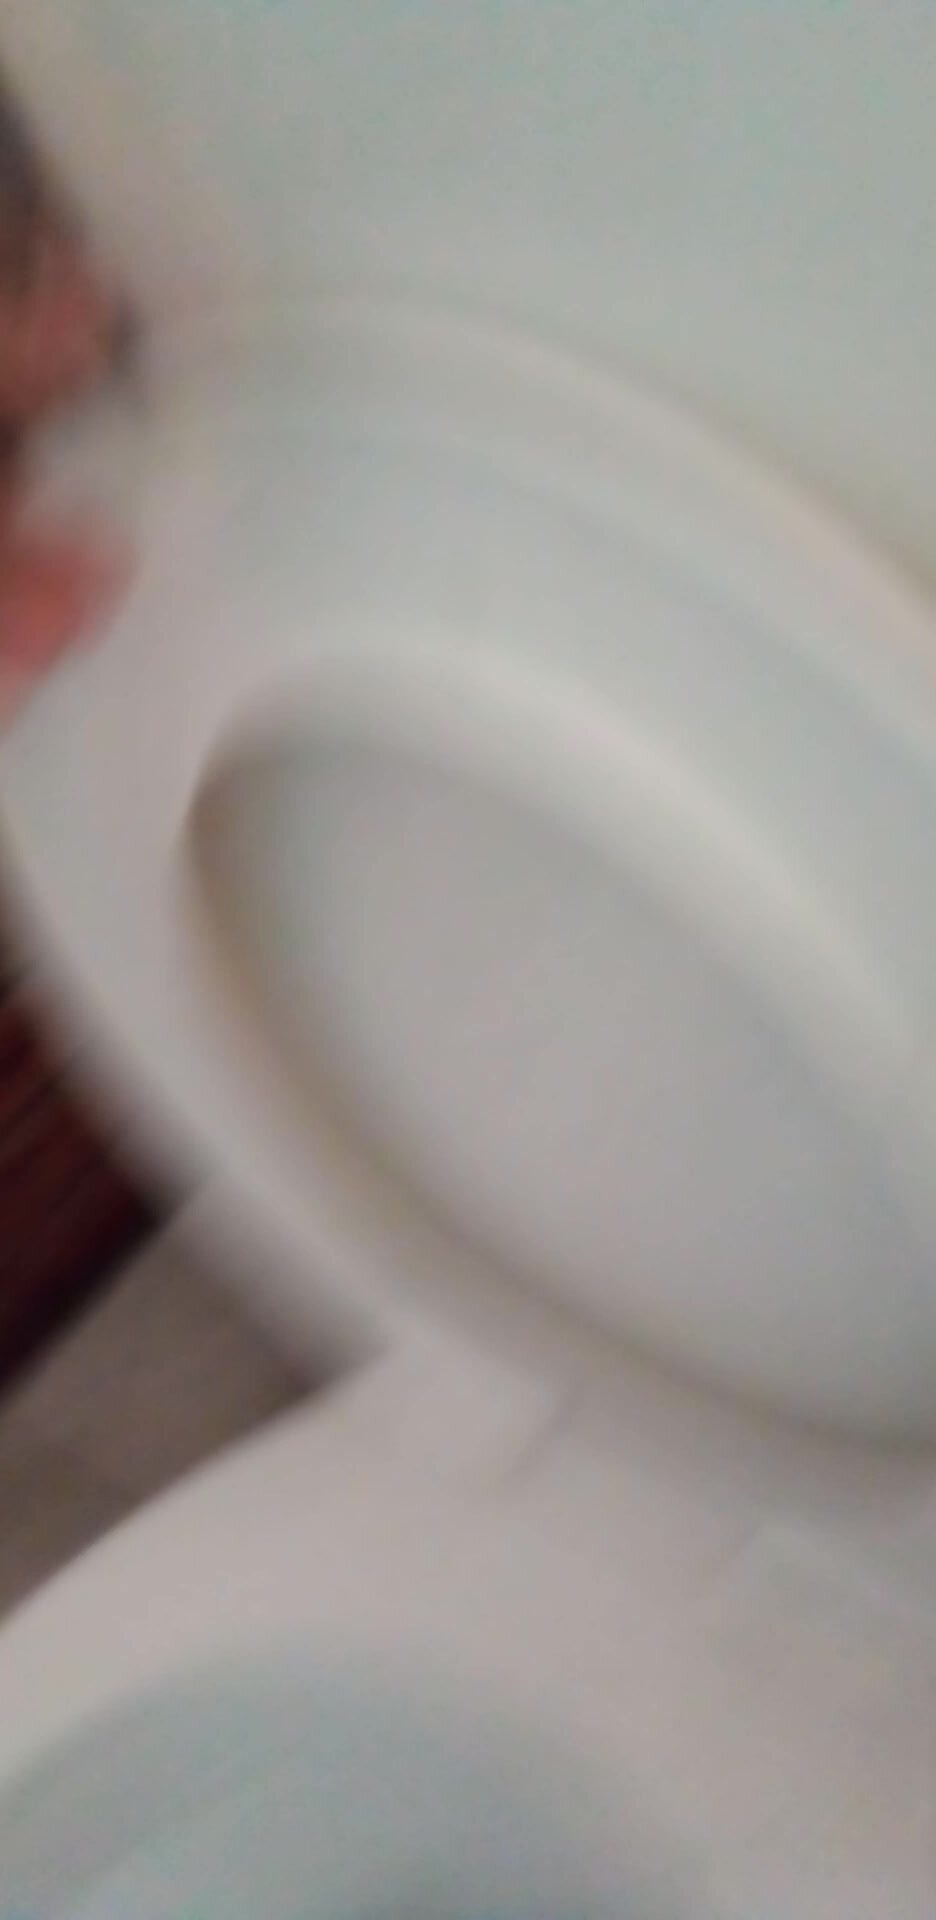 Woman pissing toilet - video 2